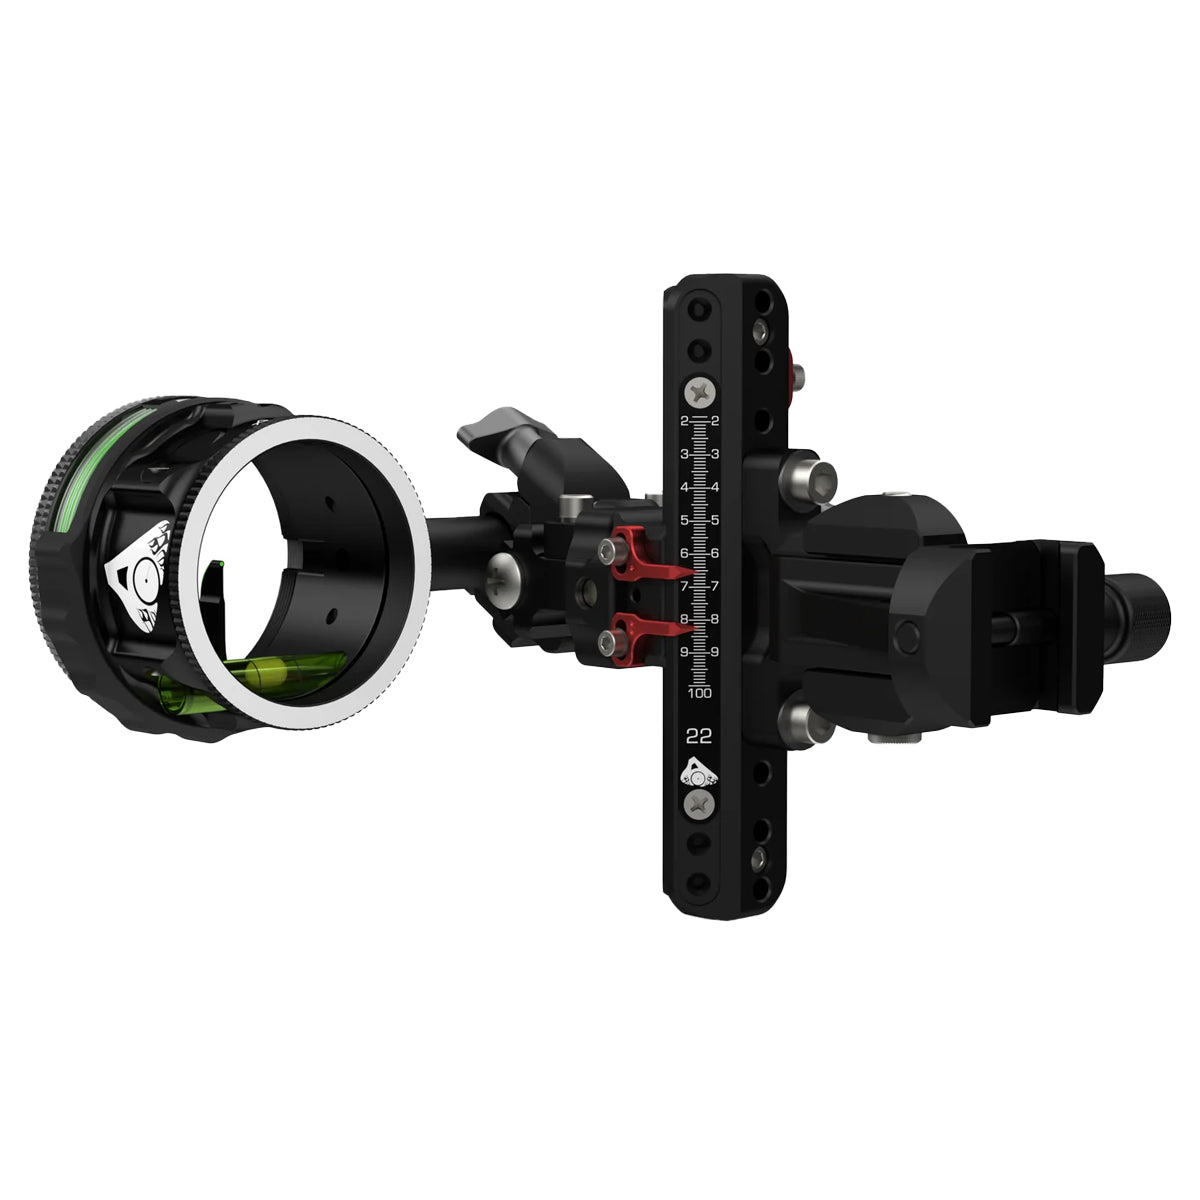 Axcel Landslyde Plus Slider Sight Picatinny AVX-41 Scope 1 Pin Bow Sight in  by GOHUNT | Axcel - GOHUNT Shop